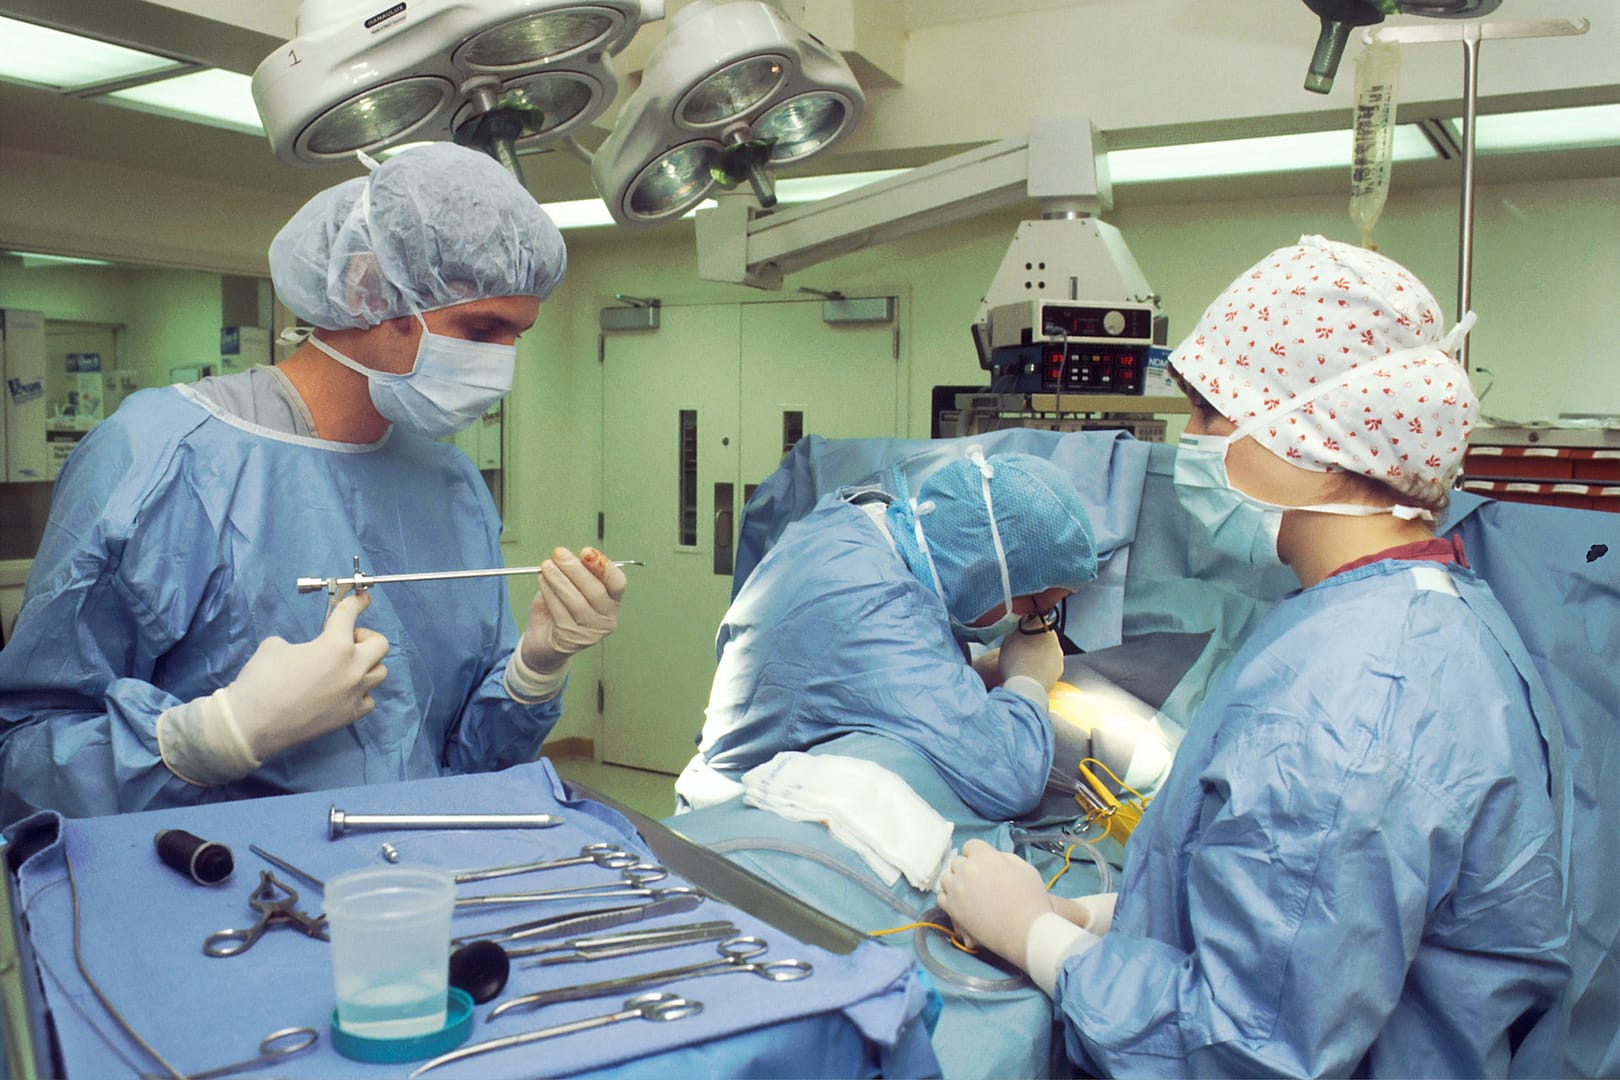 An operating theatre